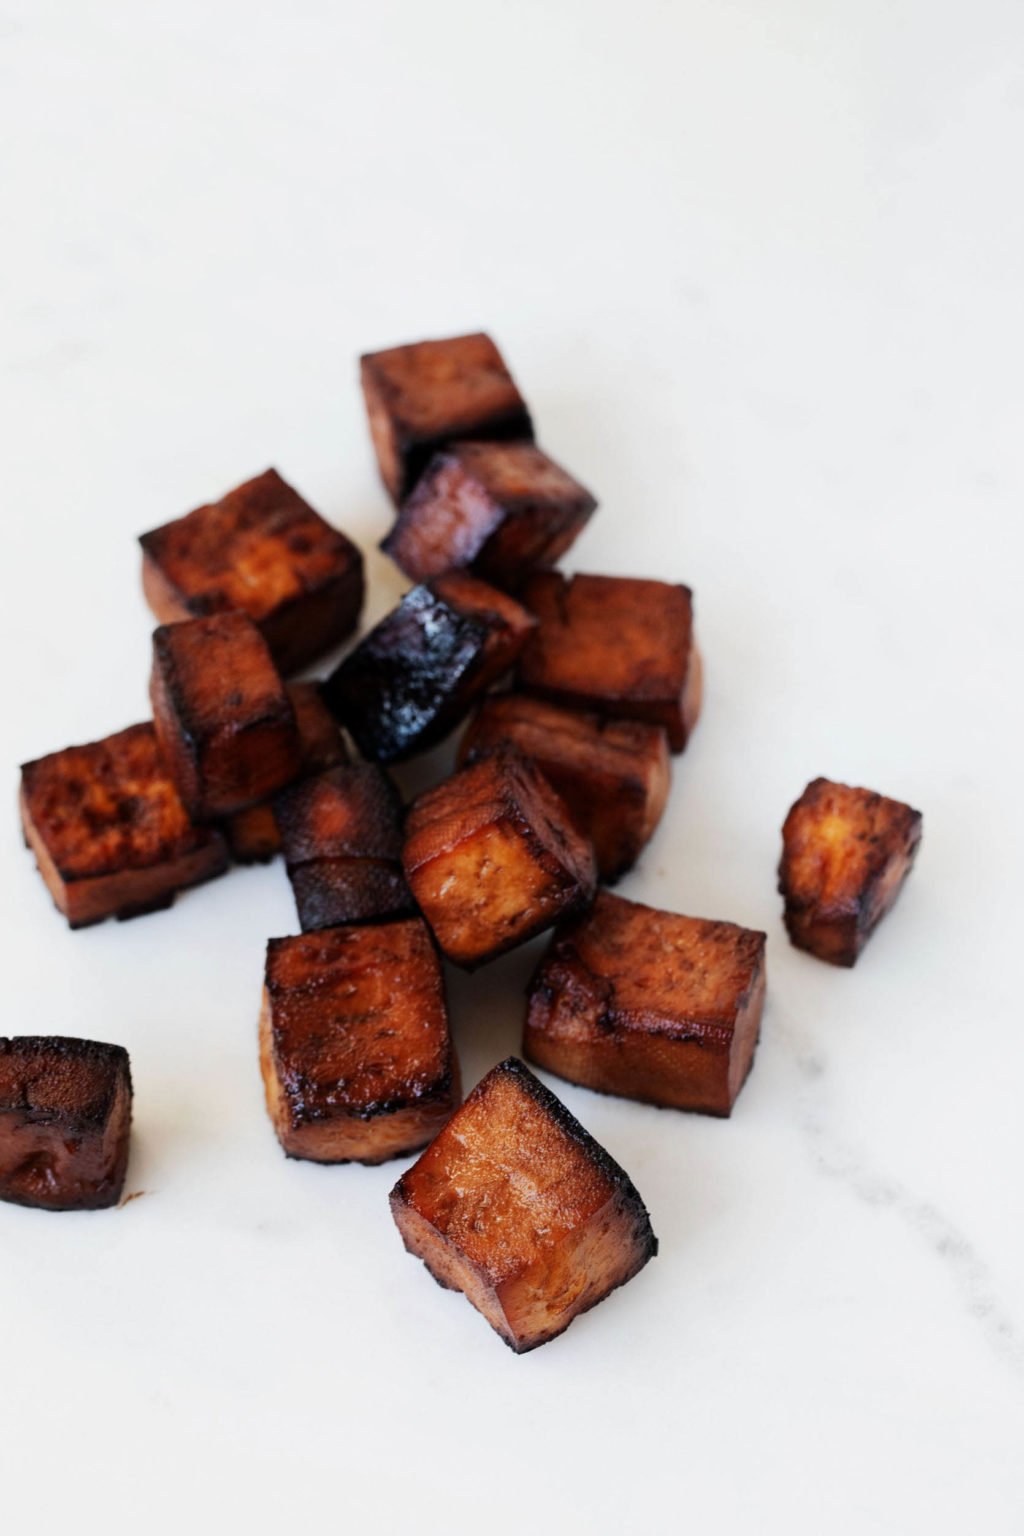 Tofu cubes, which have been marinated and baked, are lying in a small pile on a white surface. 